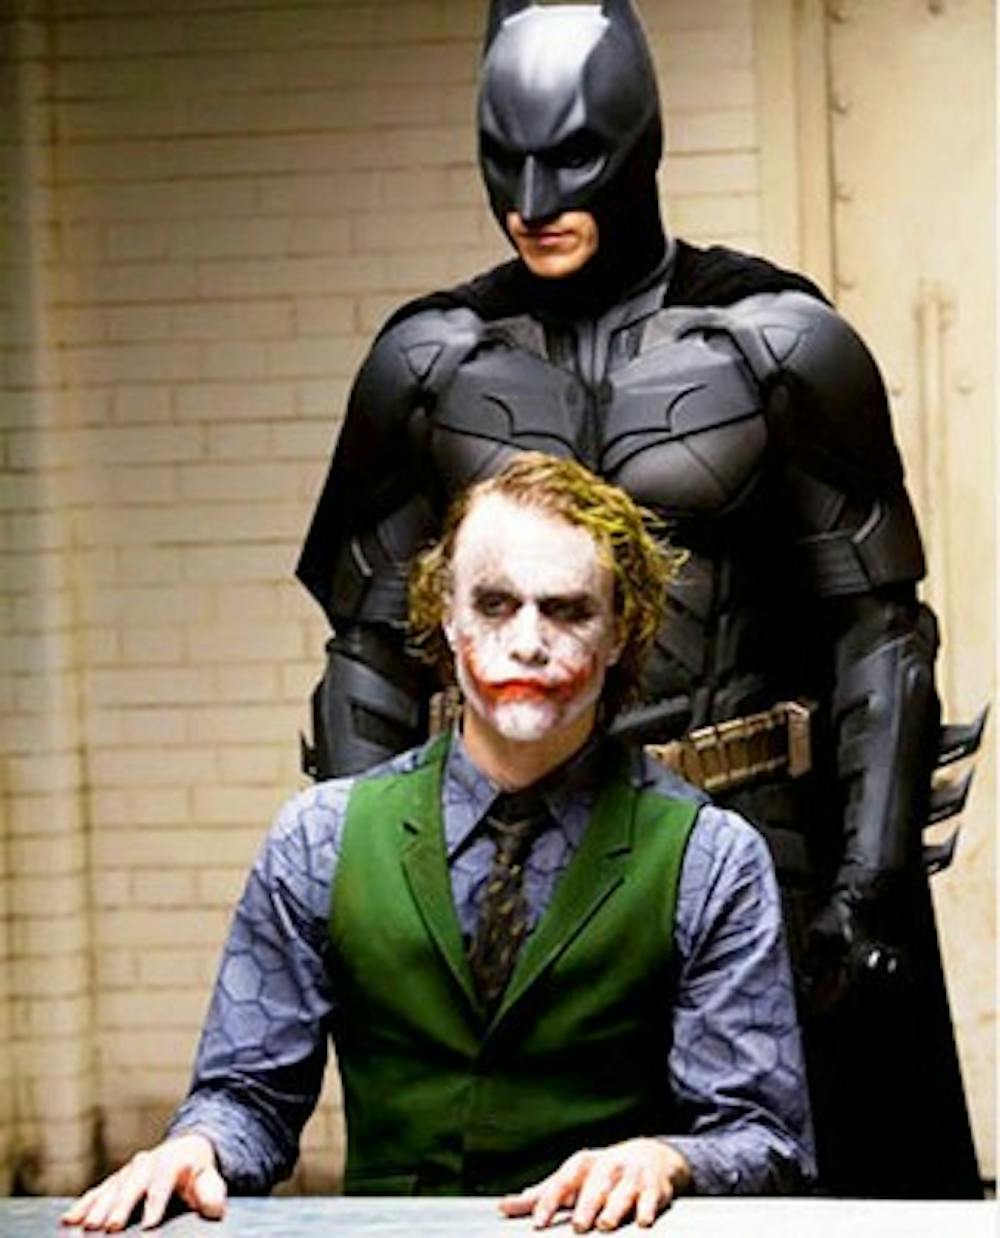 Brad analyzes the finer points of 'The Dark Knight's' unconventional campaign